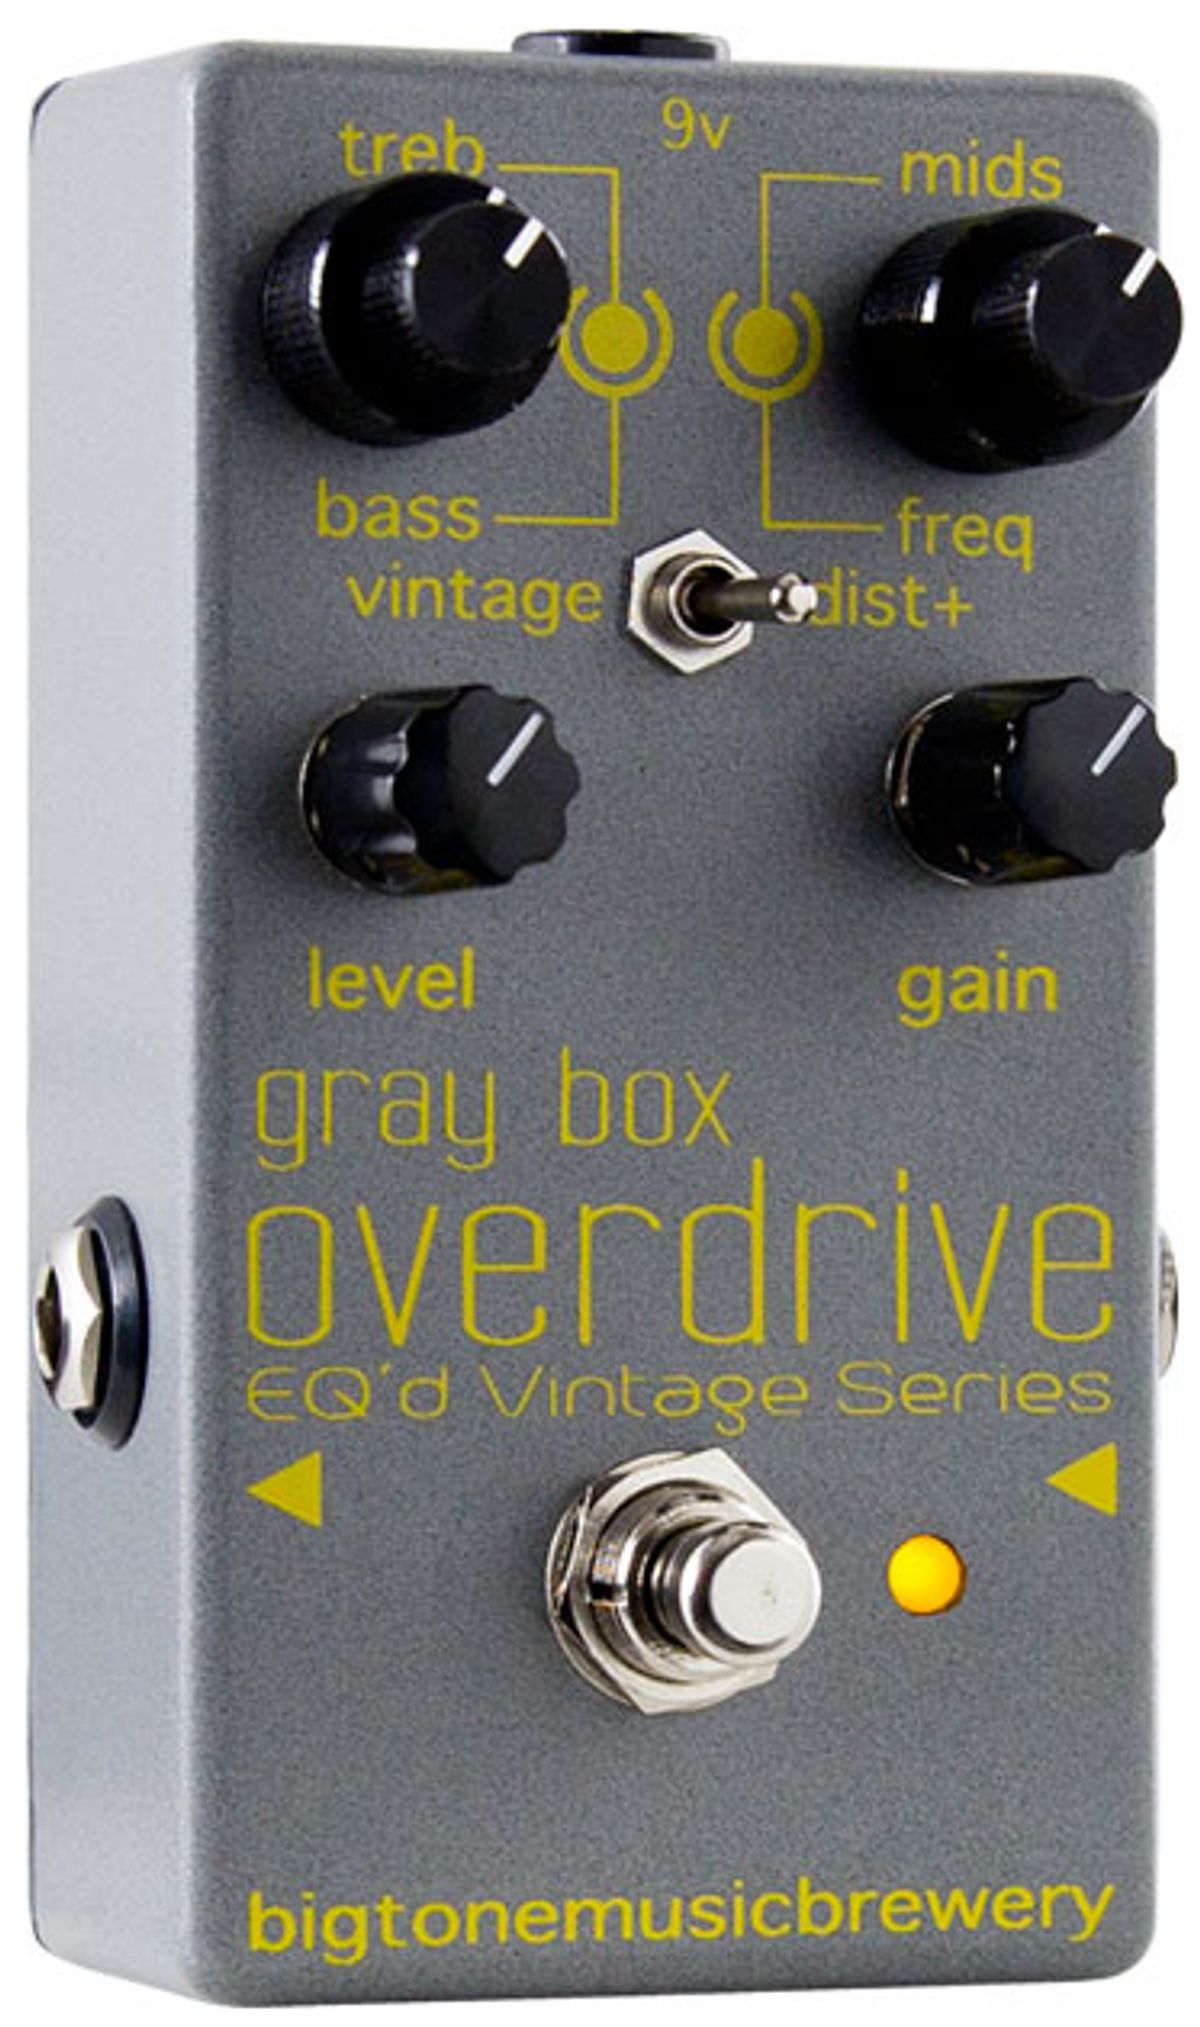 Quick Hit: Big Tone Music Brewery Gray Box Overdrive Review